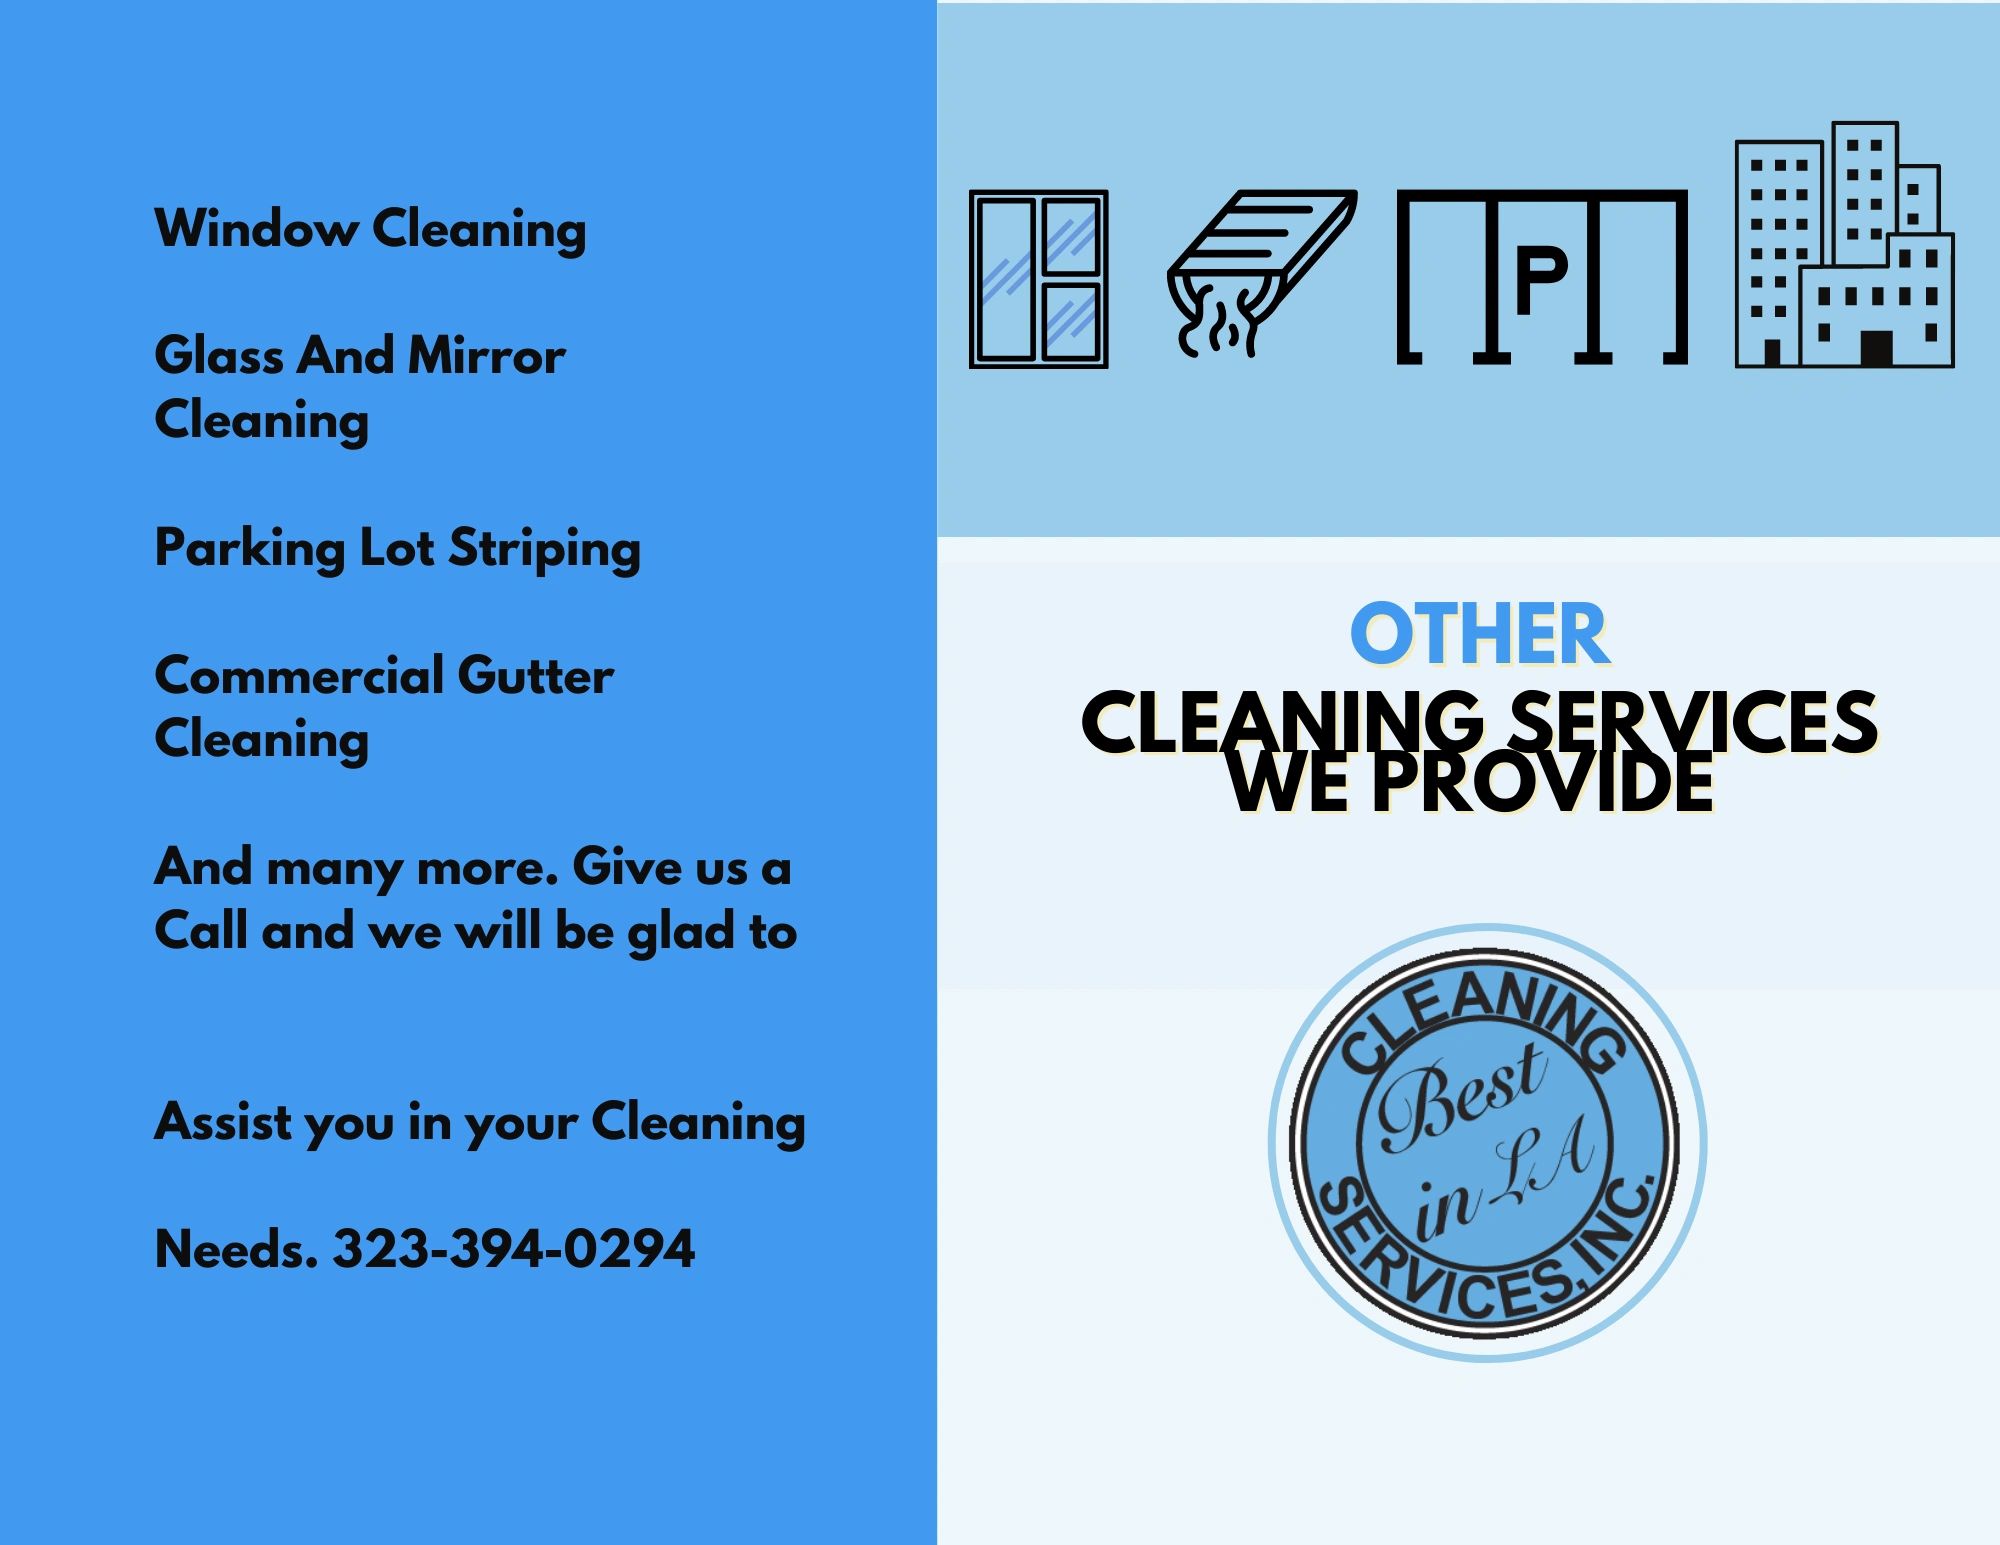 symbols of window cleaning , gutter cleaning, parking stripping , and commercial building. services